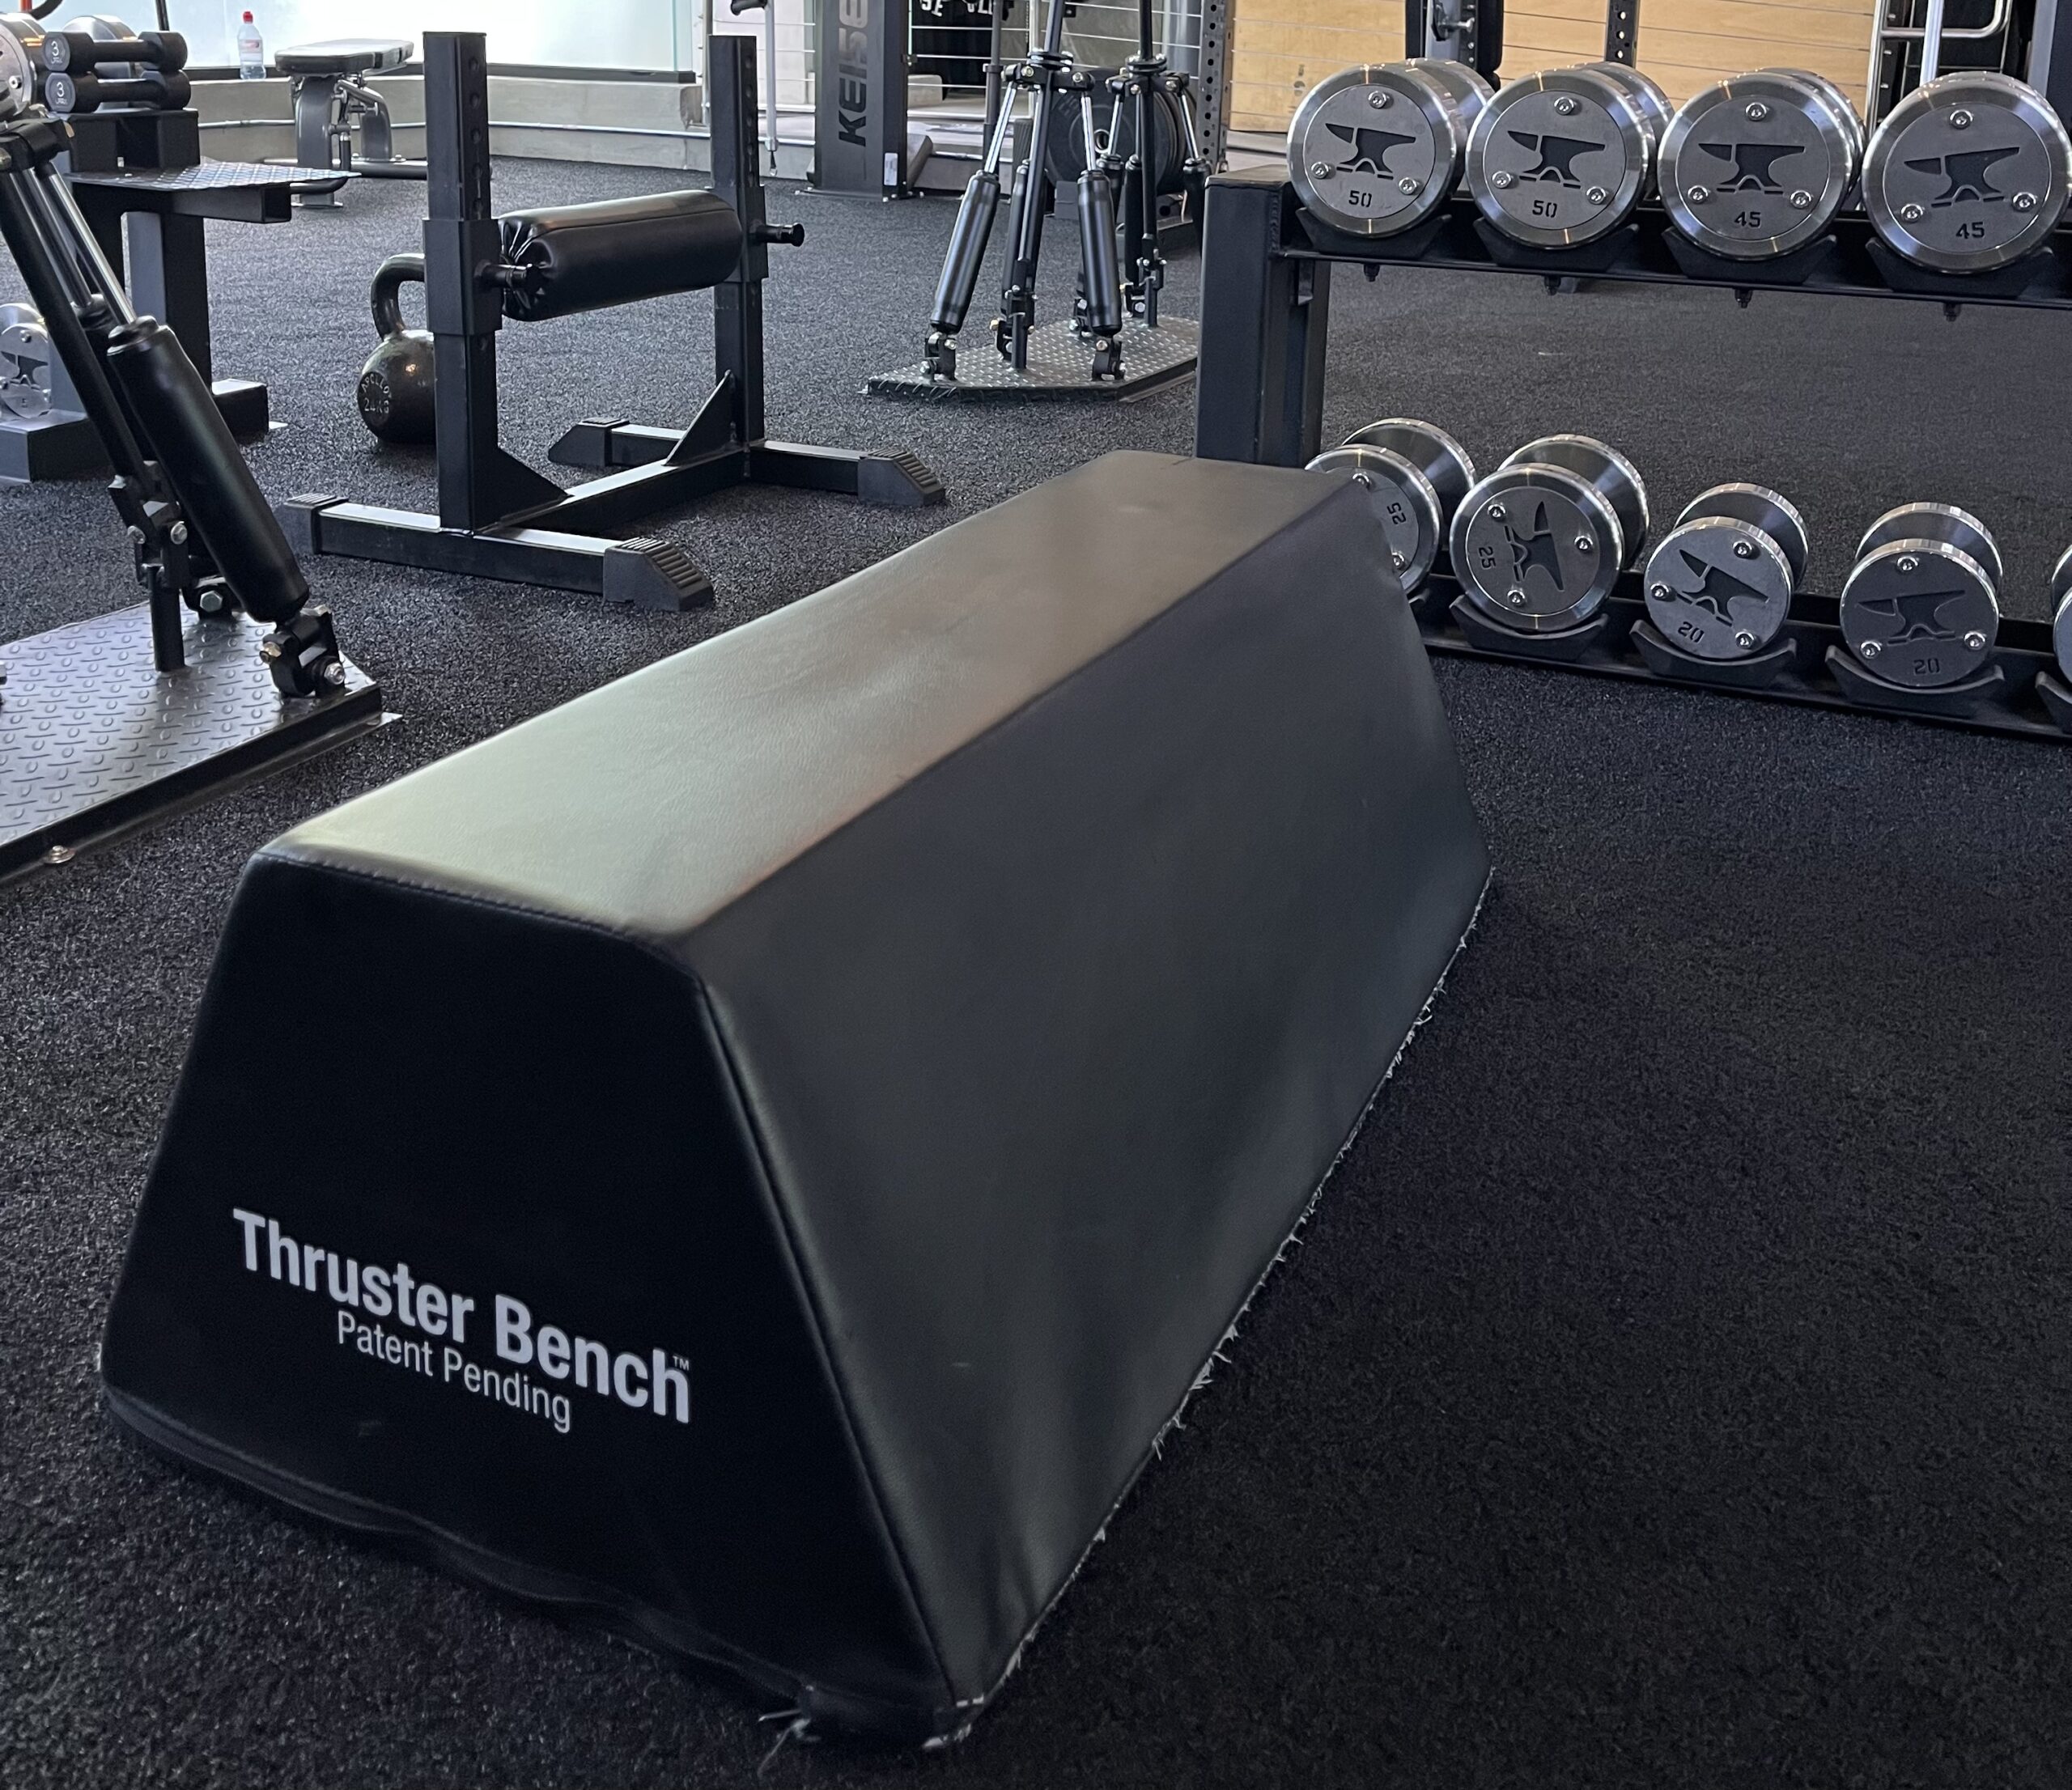 Thruster Bench - Glute Bench For Hip Thrusts | Body360 Fit